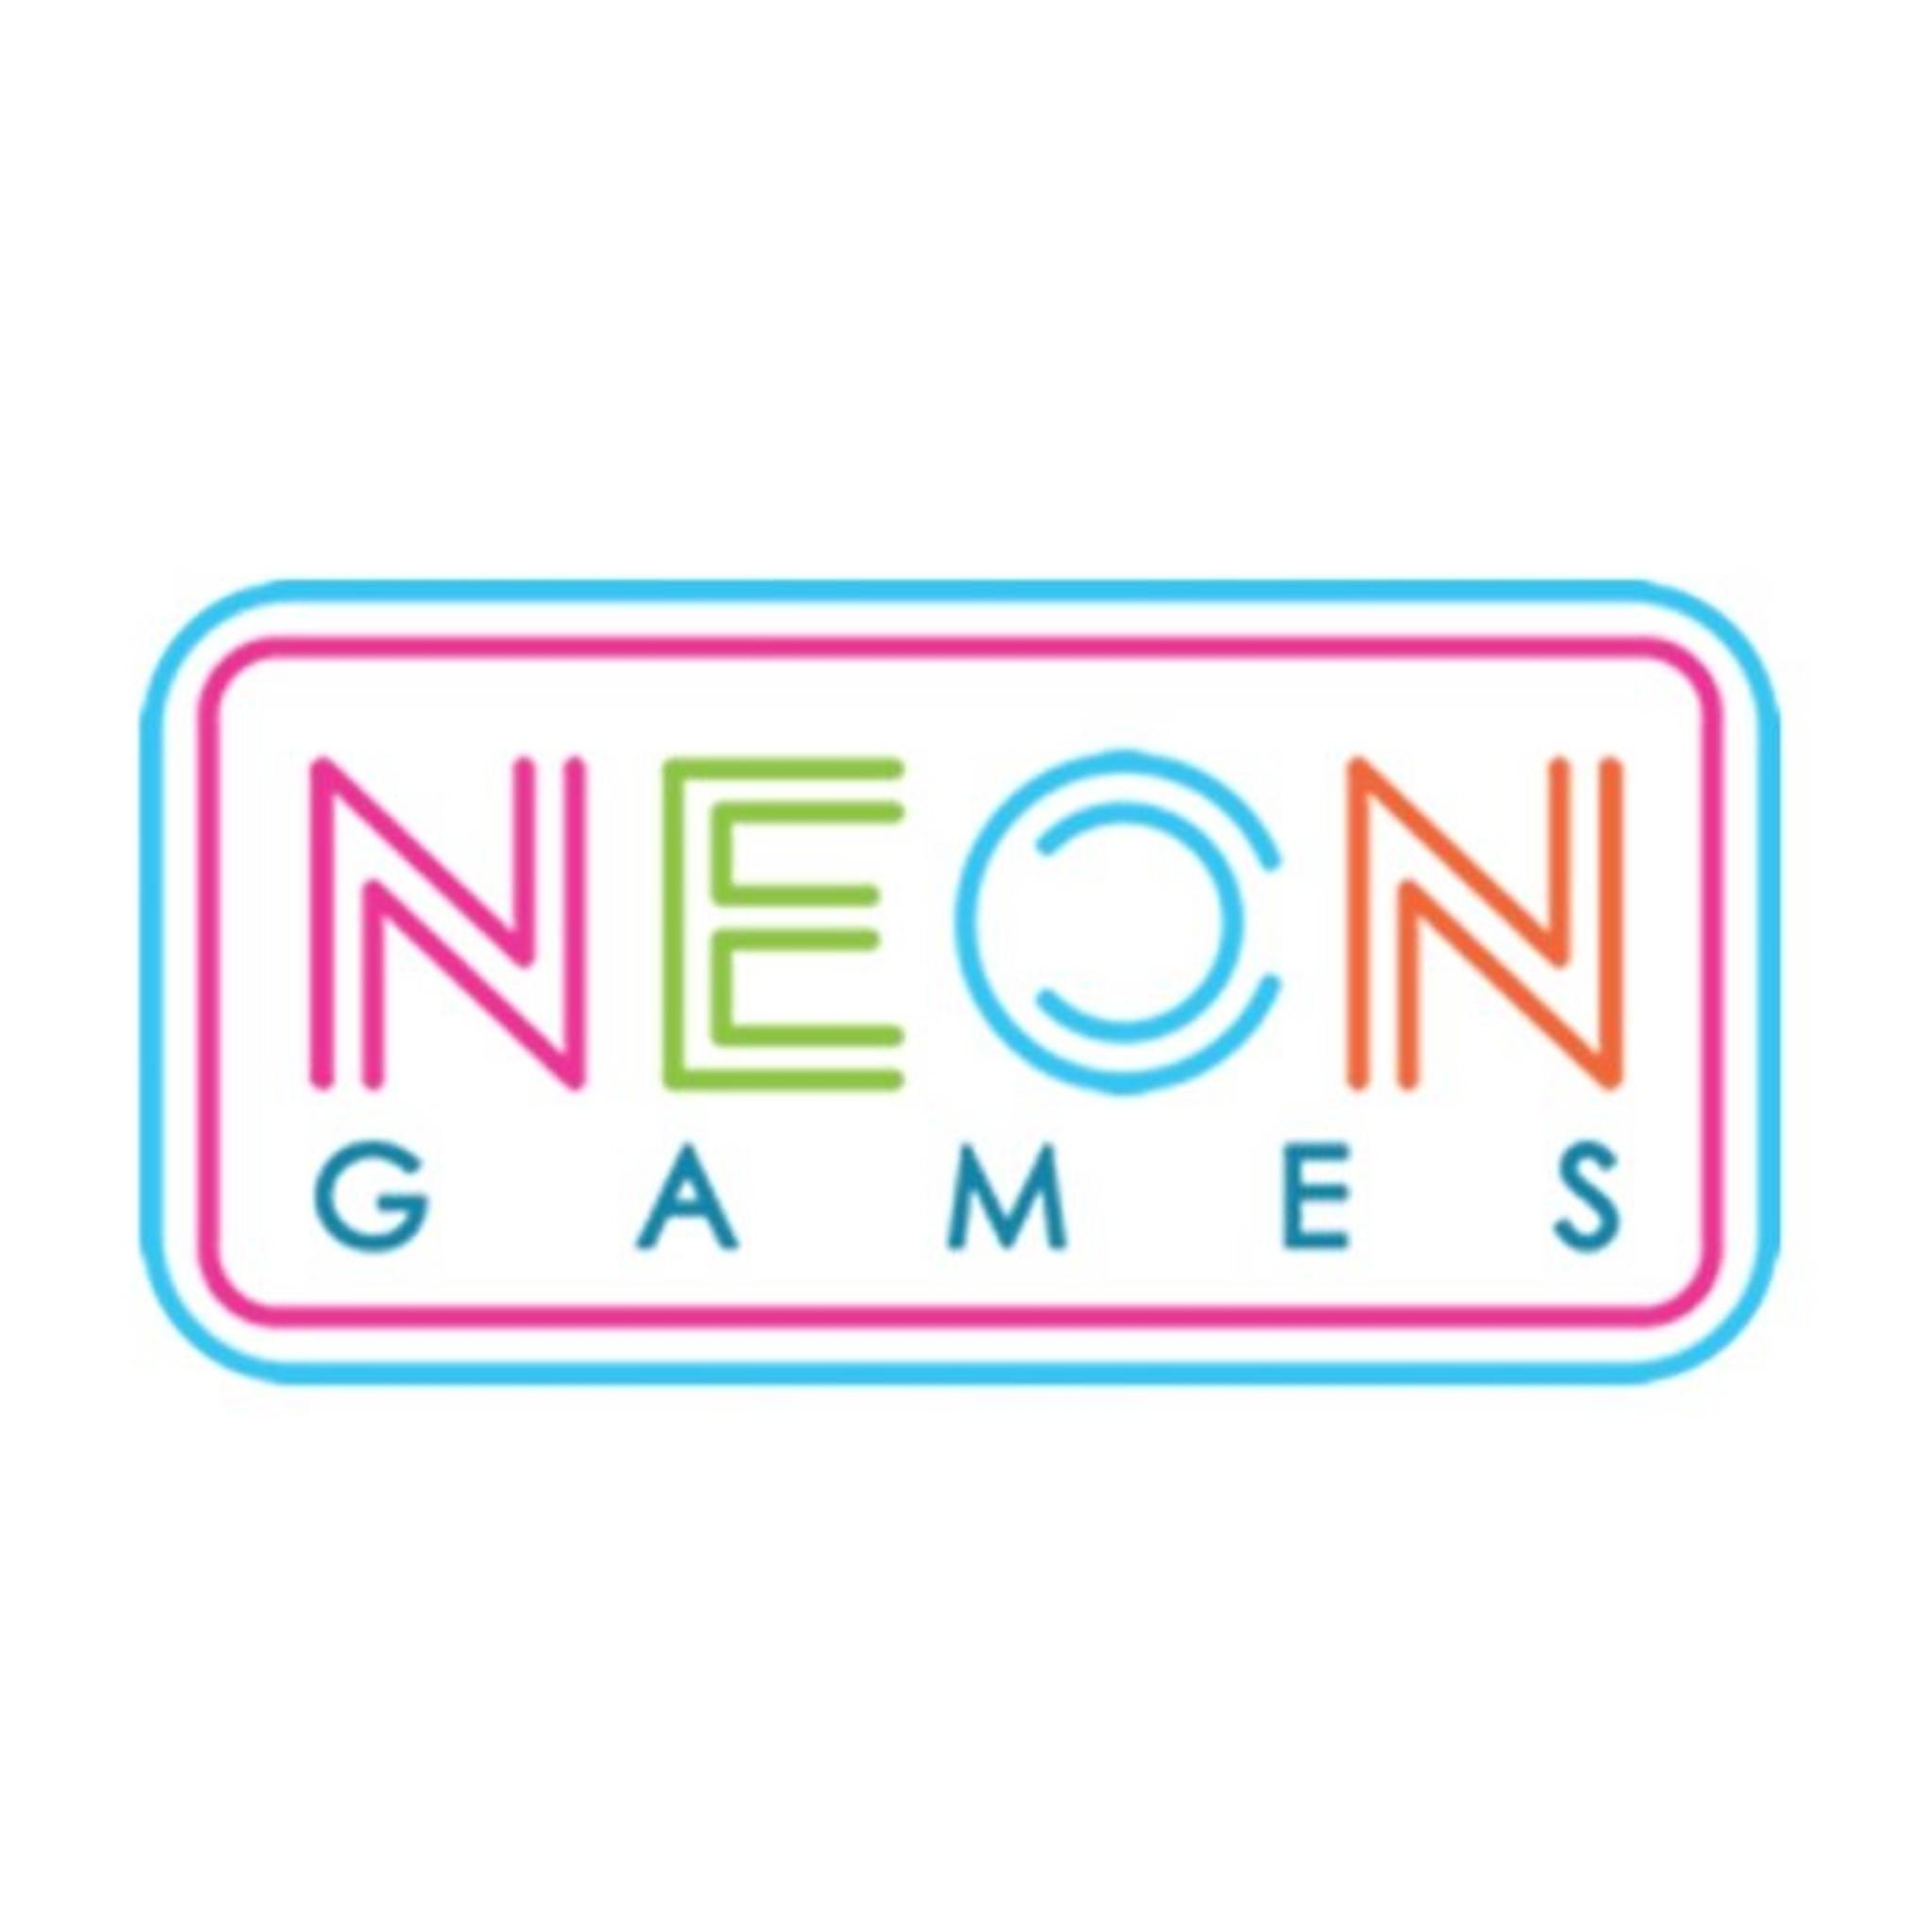 Neoon Games Card - 1200 points